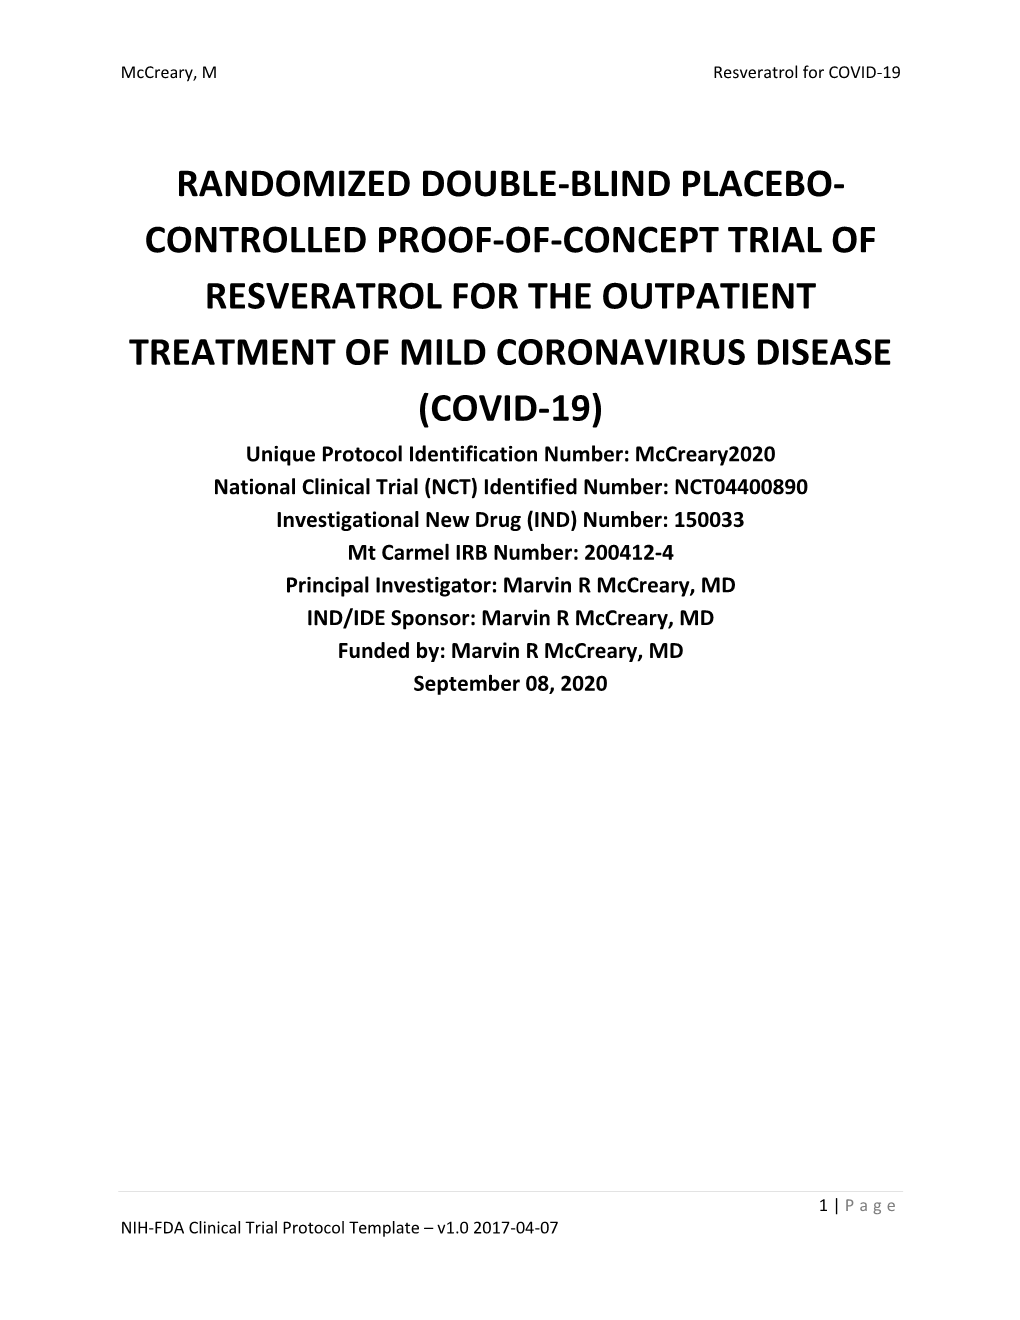 Randomized Double-Blind Placebo- Controlled Proof